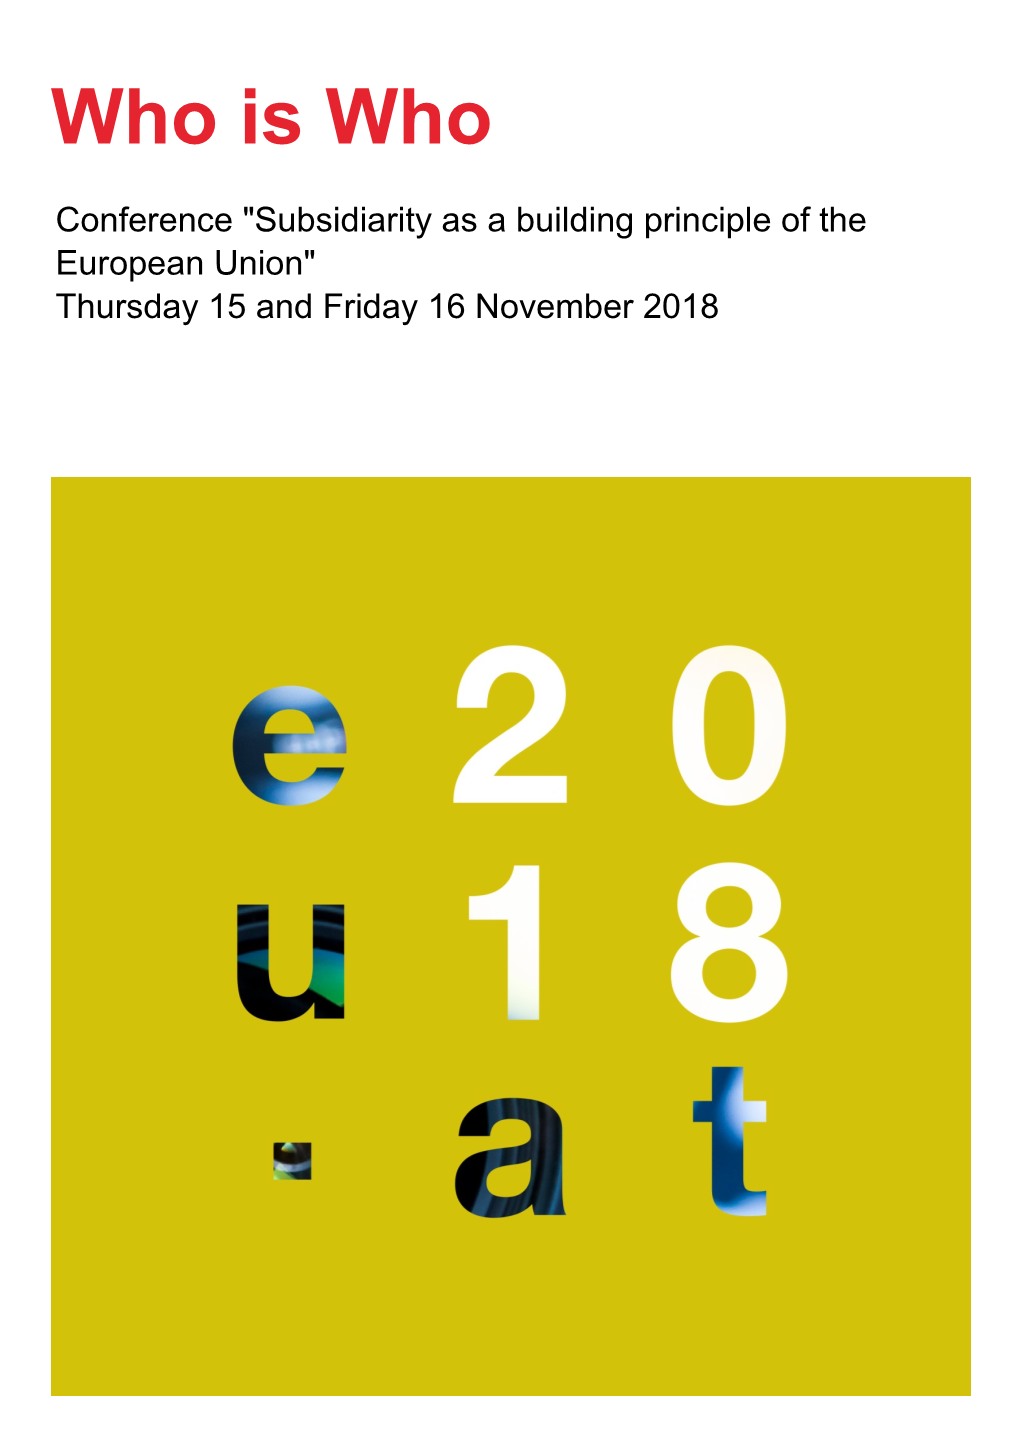 Conference "Subsidiarity As a Building Principle of the European Union" Thursday 15 and Friday 16 November 2018